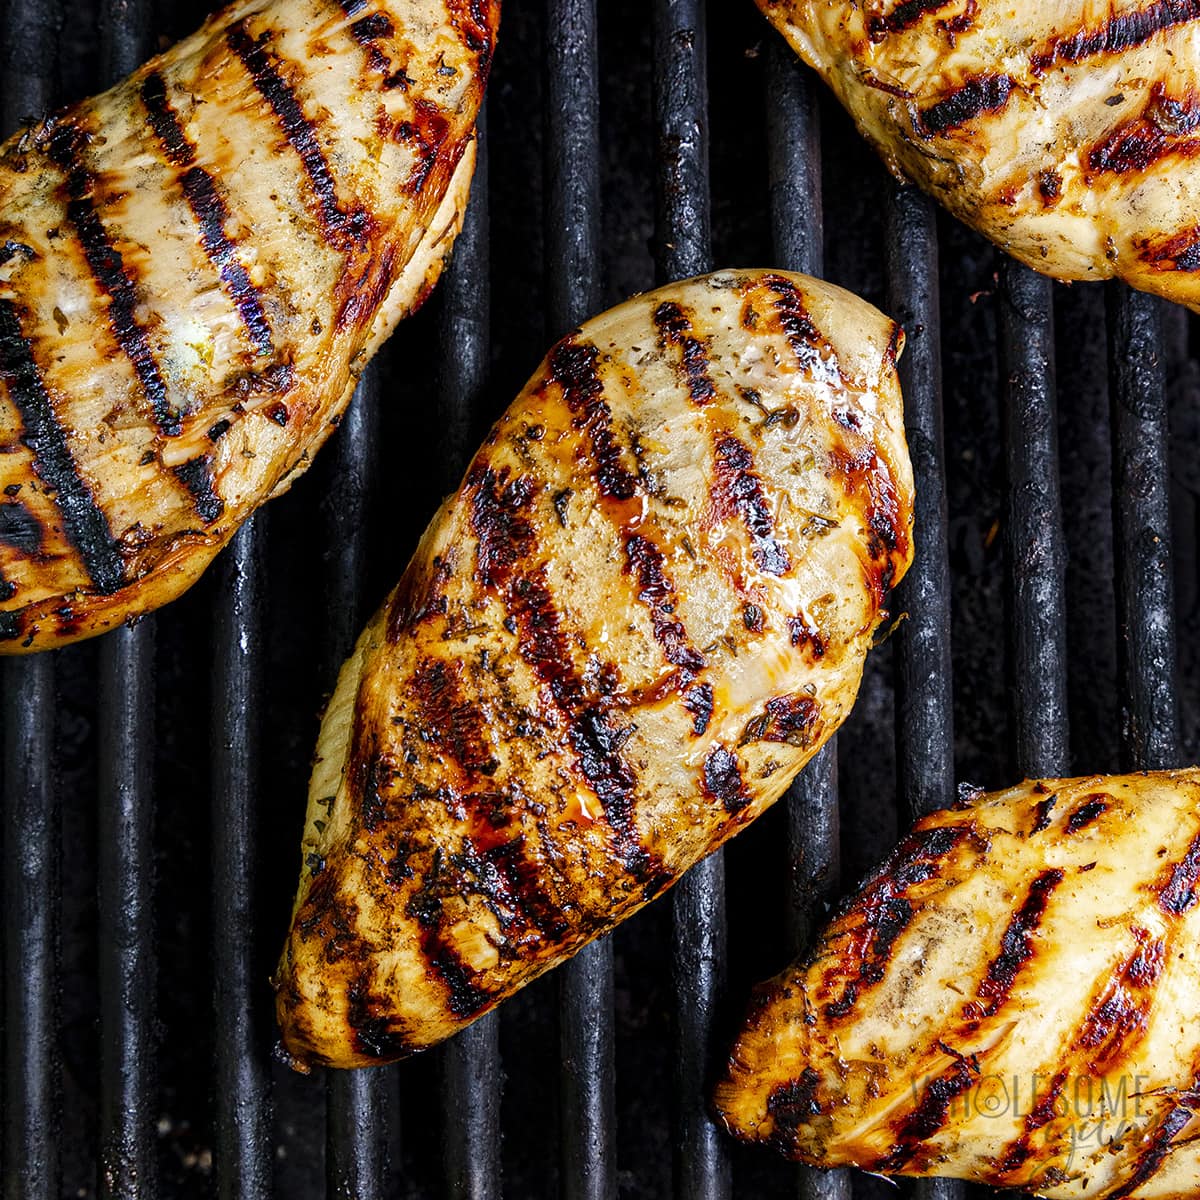 Chicken breast on the grill.